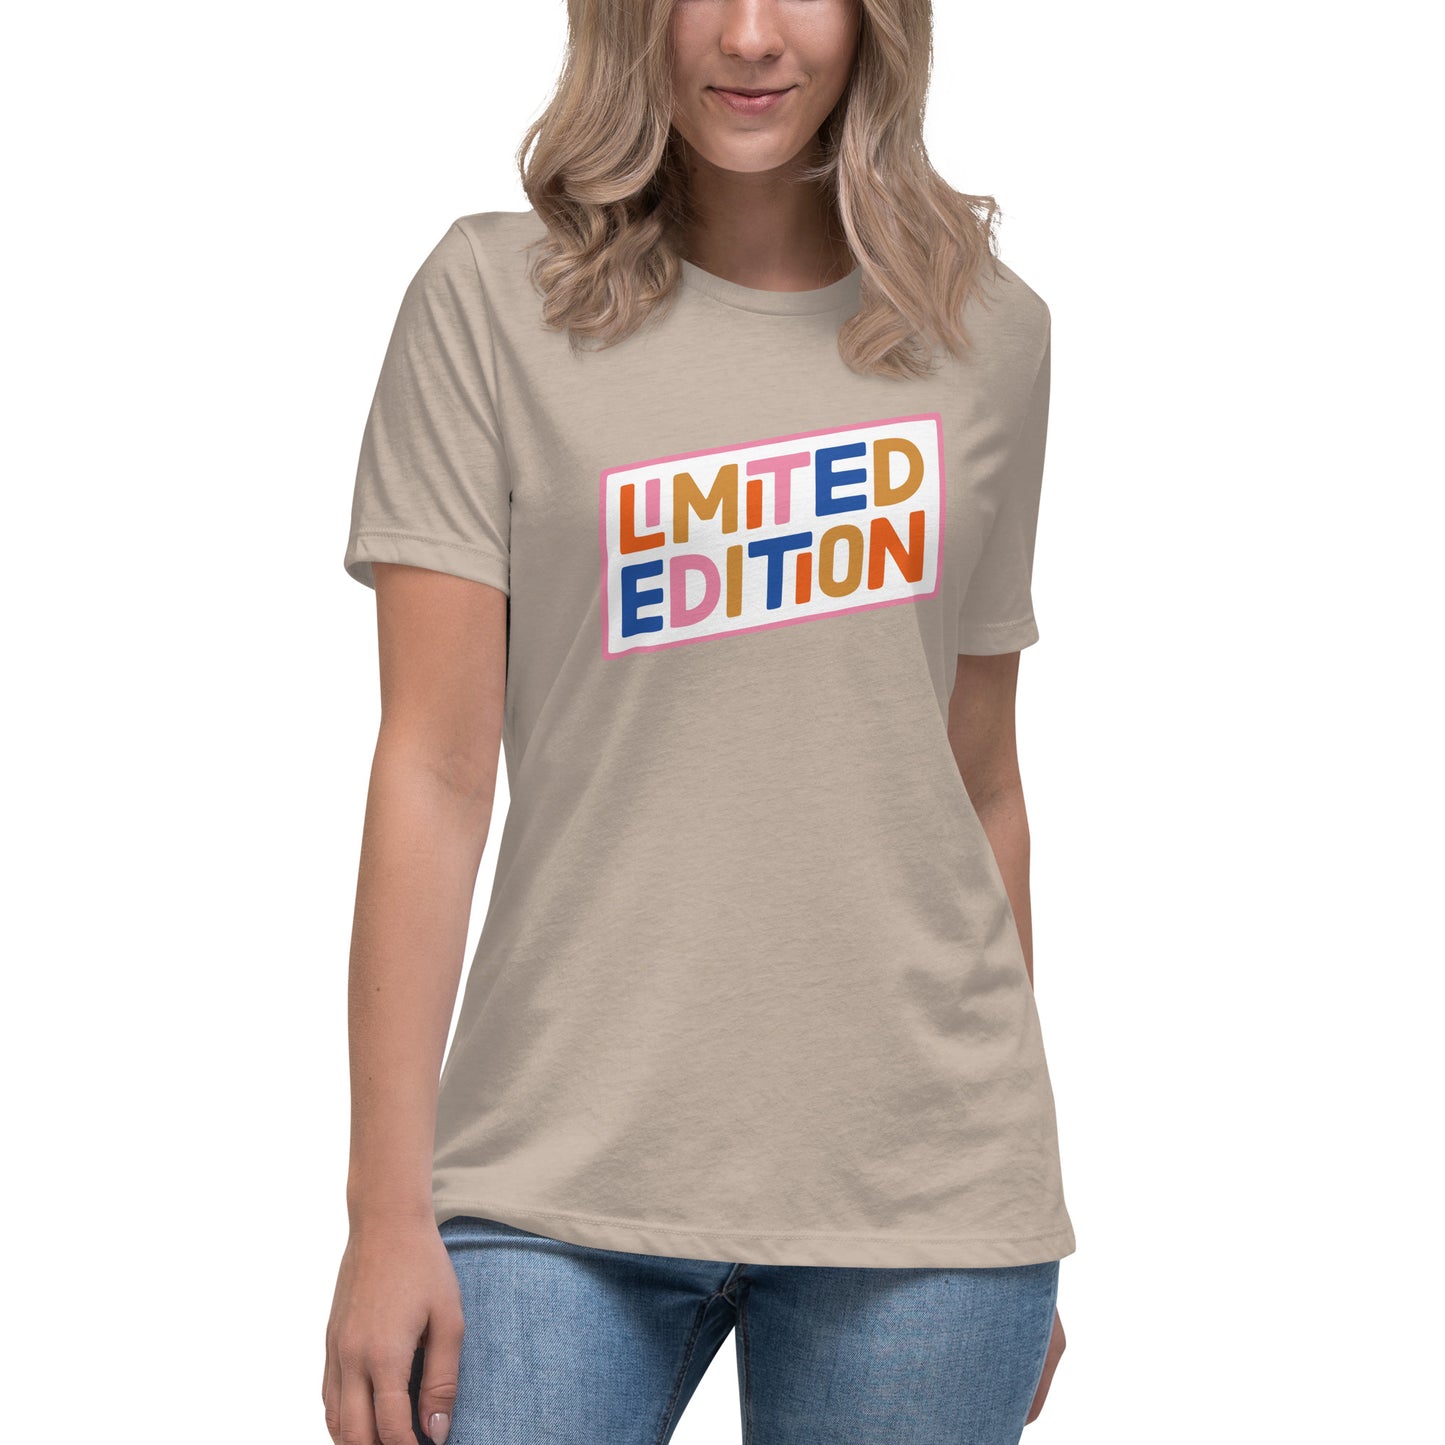 Limited Edition — Women's Relaxed Tee